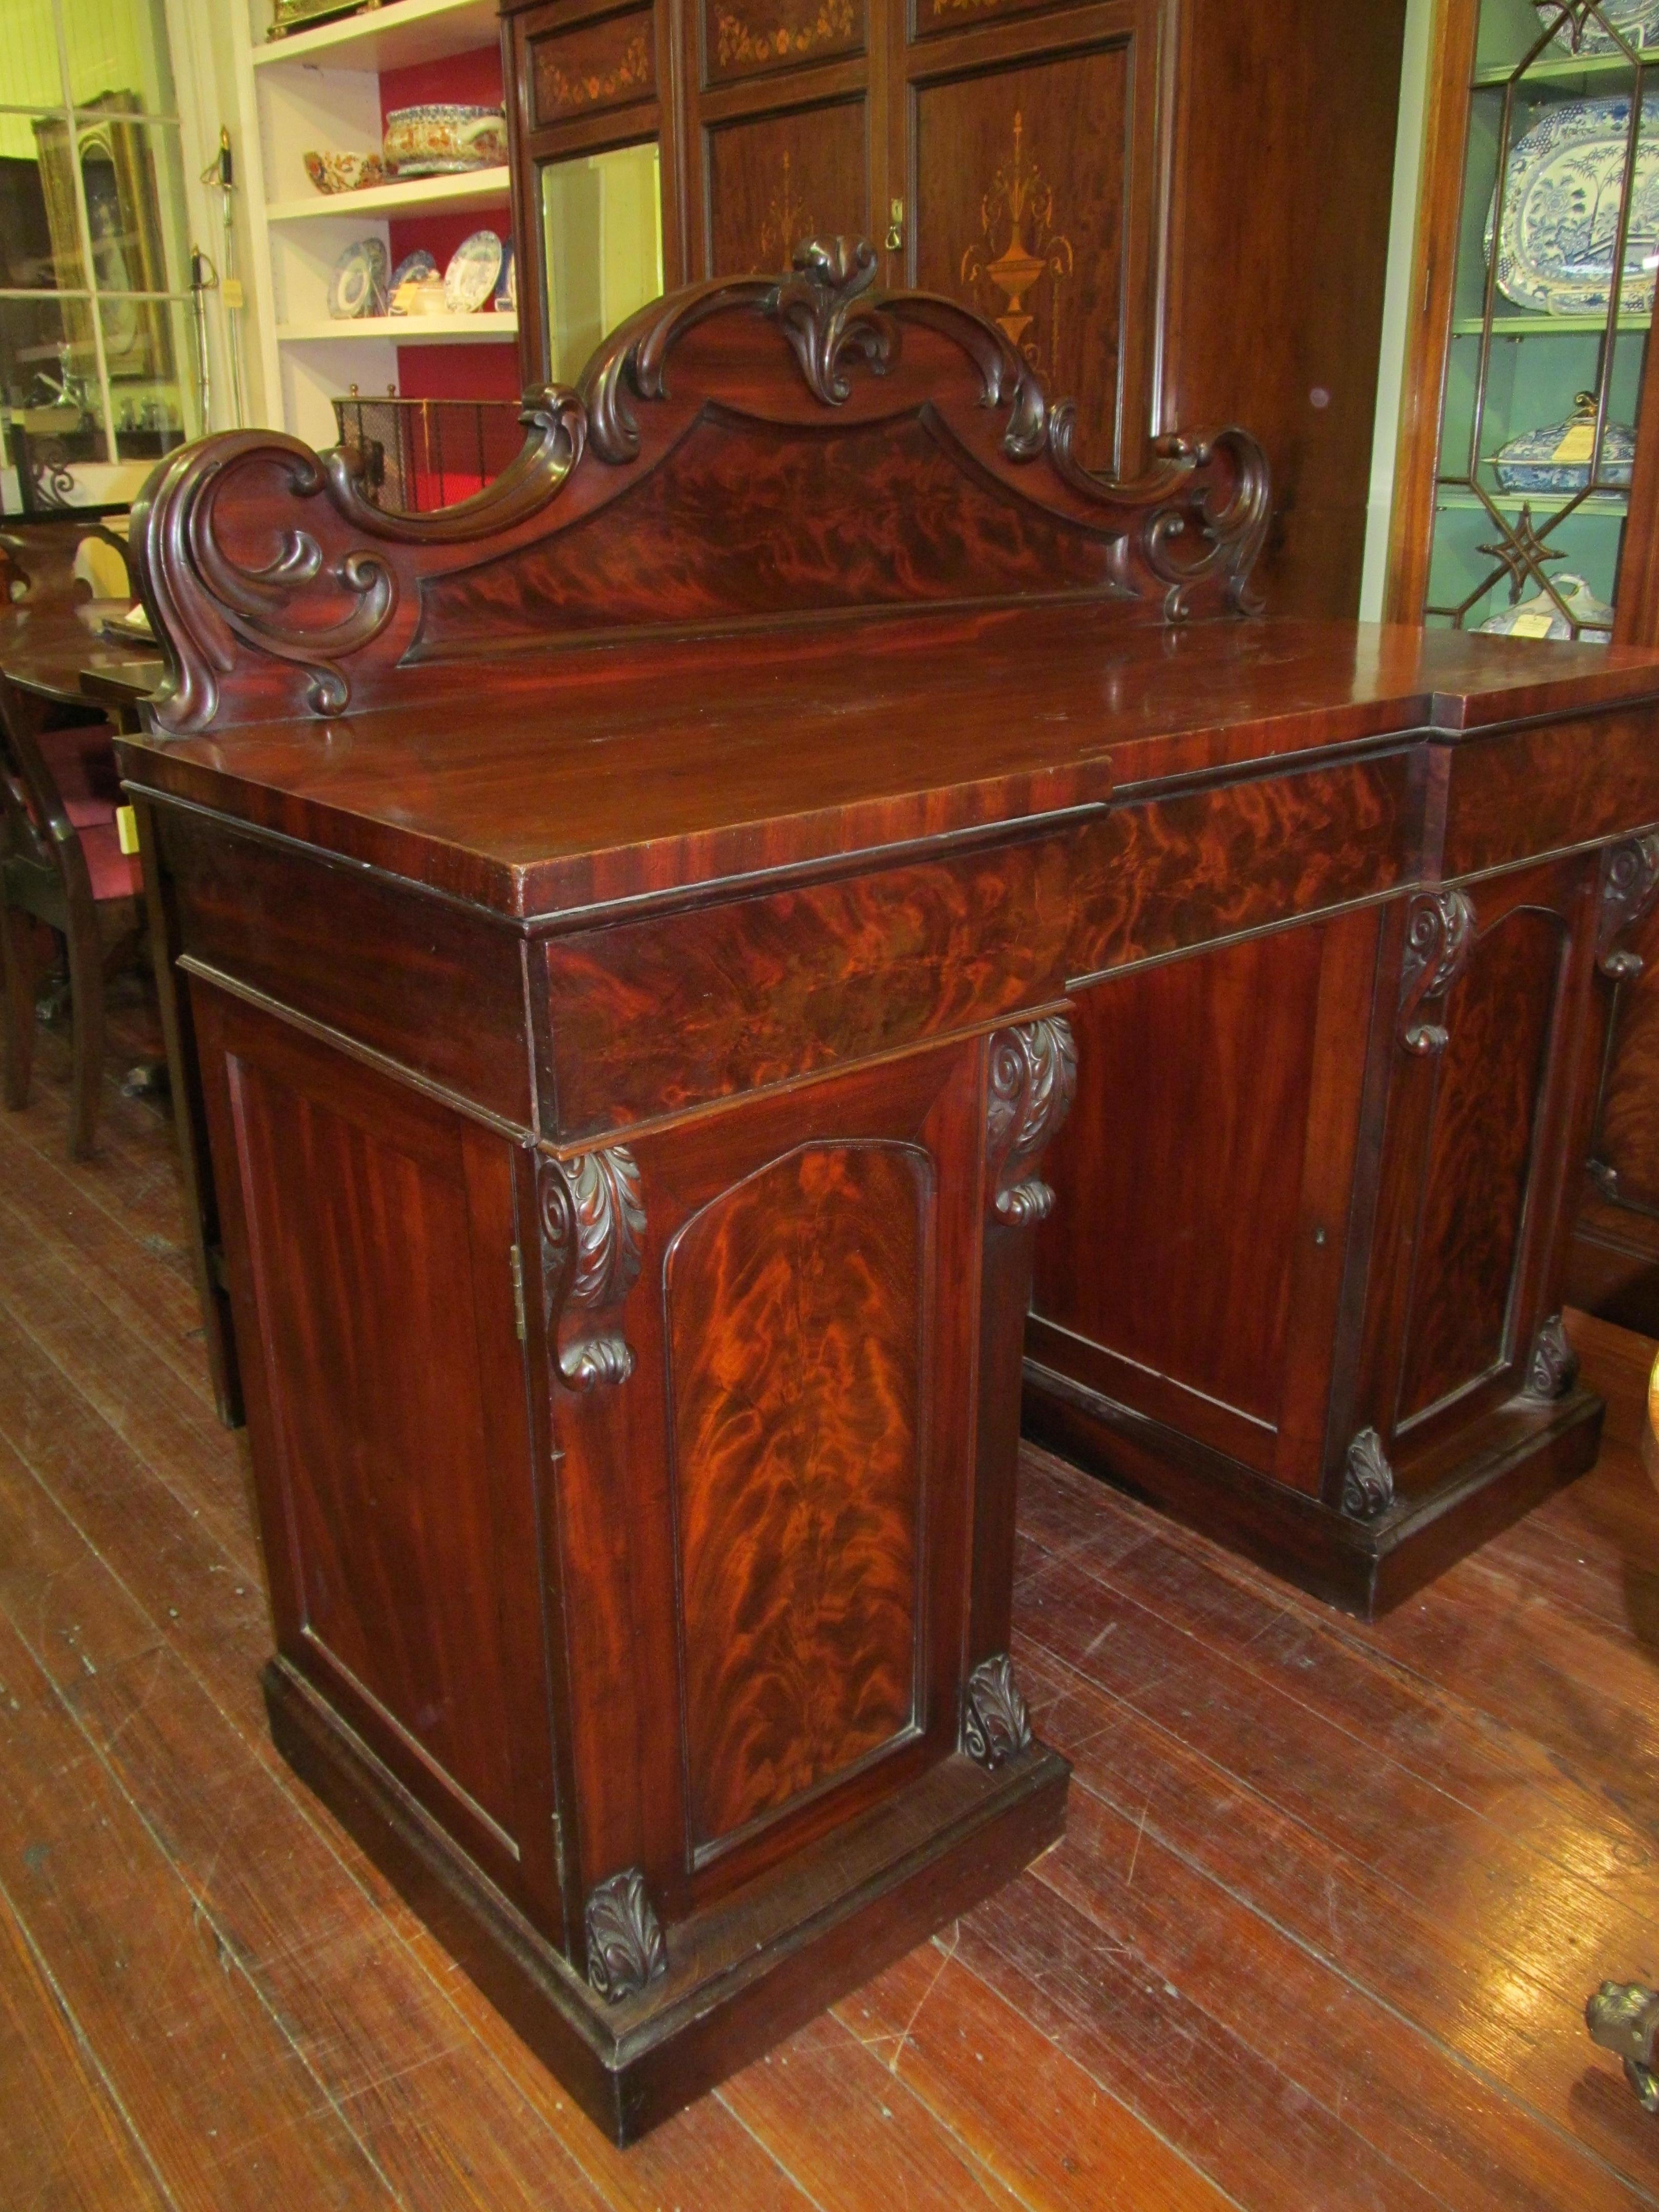 Fabulous quality antique English book-matched flame mahogany Victorian sideboard with pedestal cupboards, hand carved pilasters and interior cellarette drawer (right side).

Please note superb book-matched flame mahogany and cellarette drawer behind